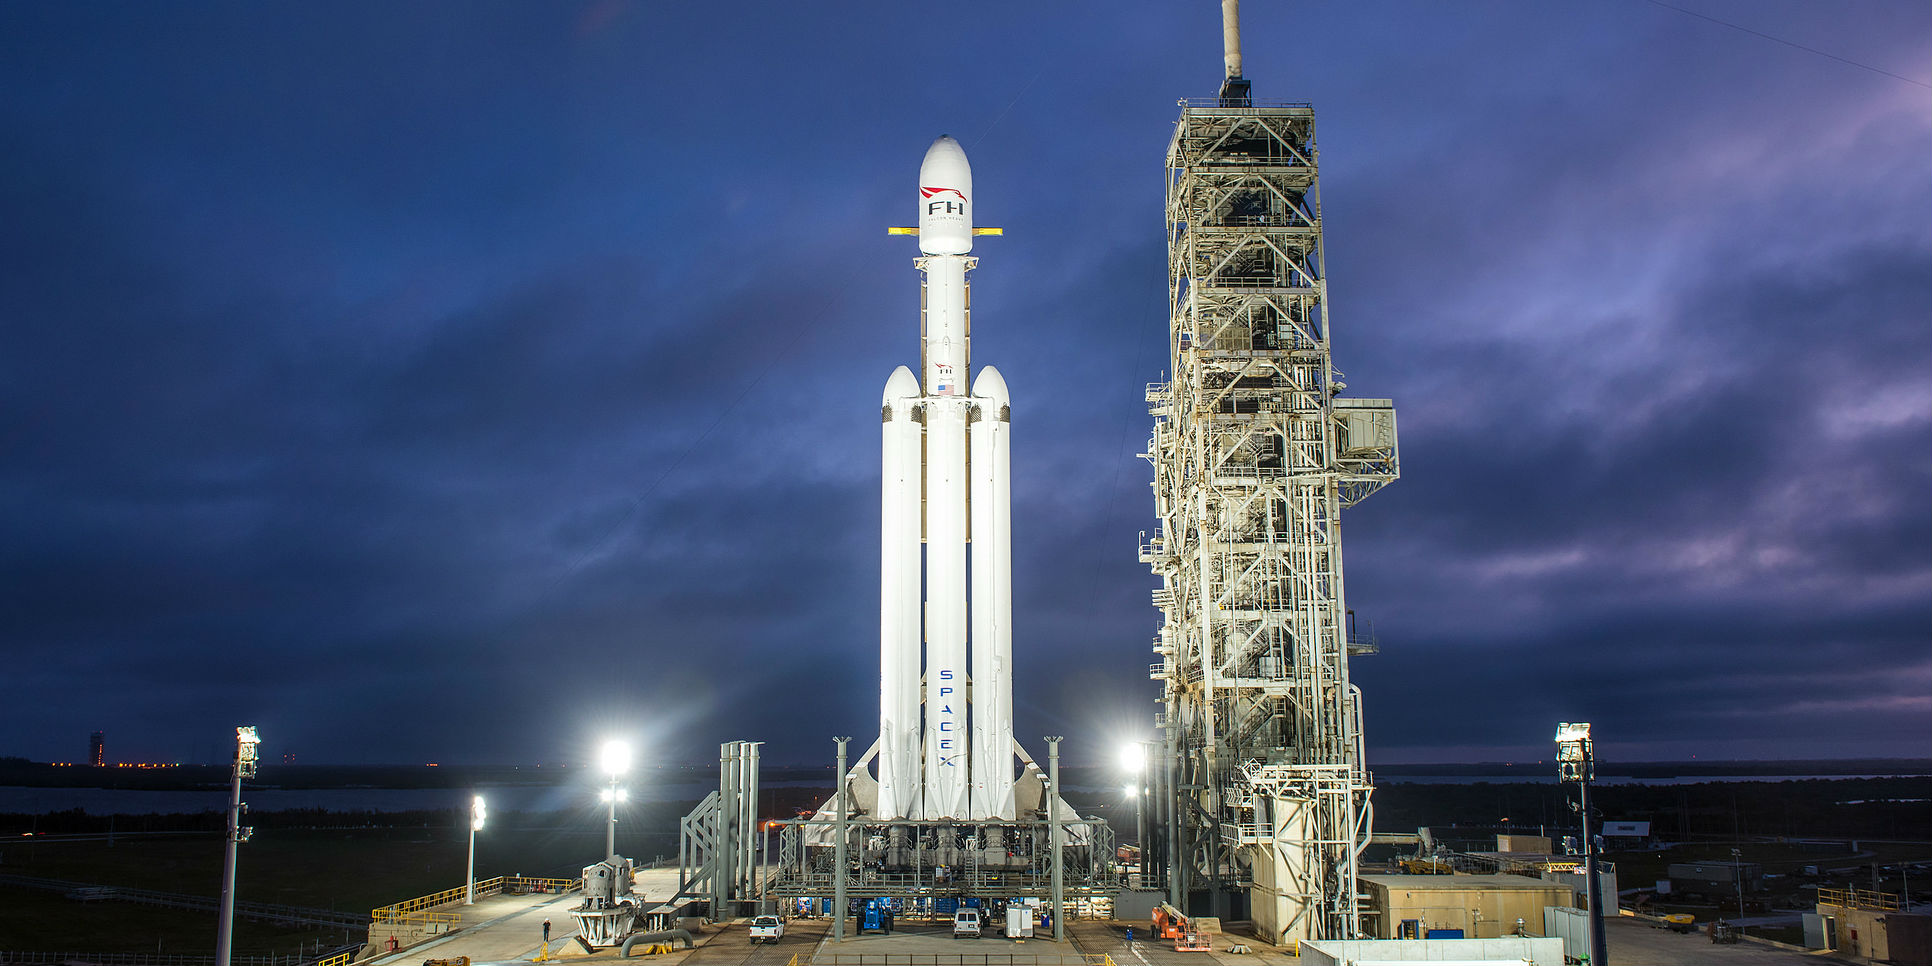 The crisis in the US government: launch of the SpaceX Falcon Heavy delayed